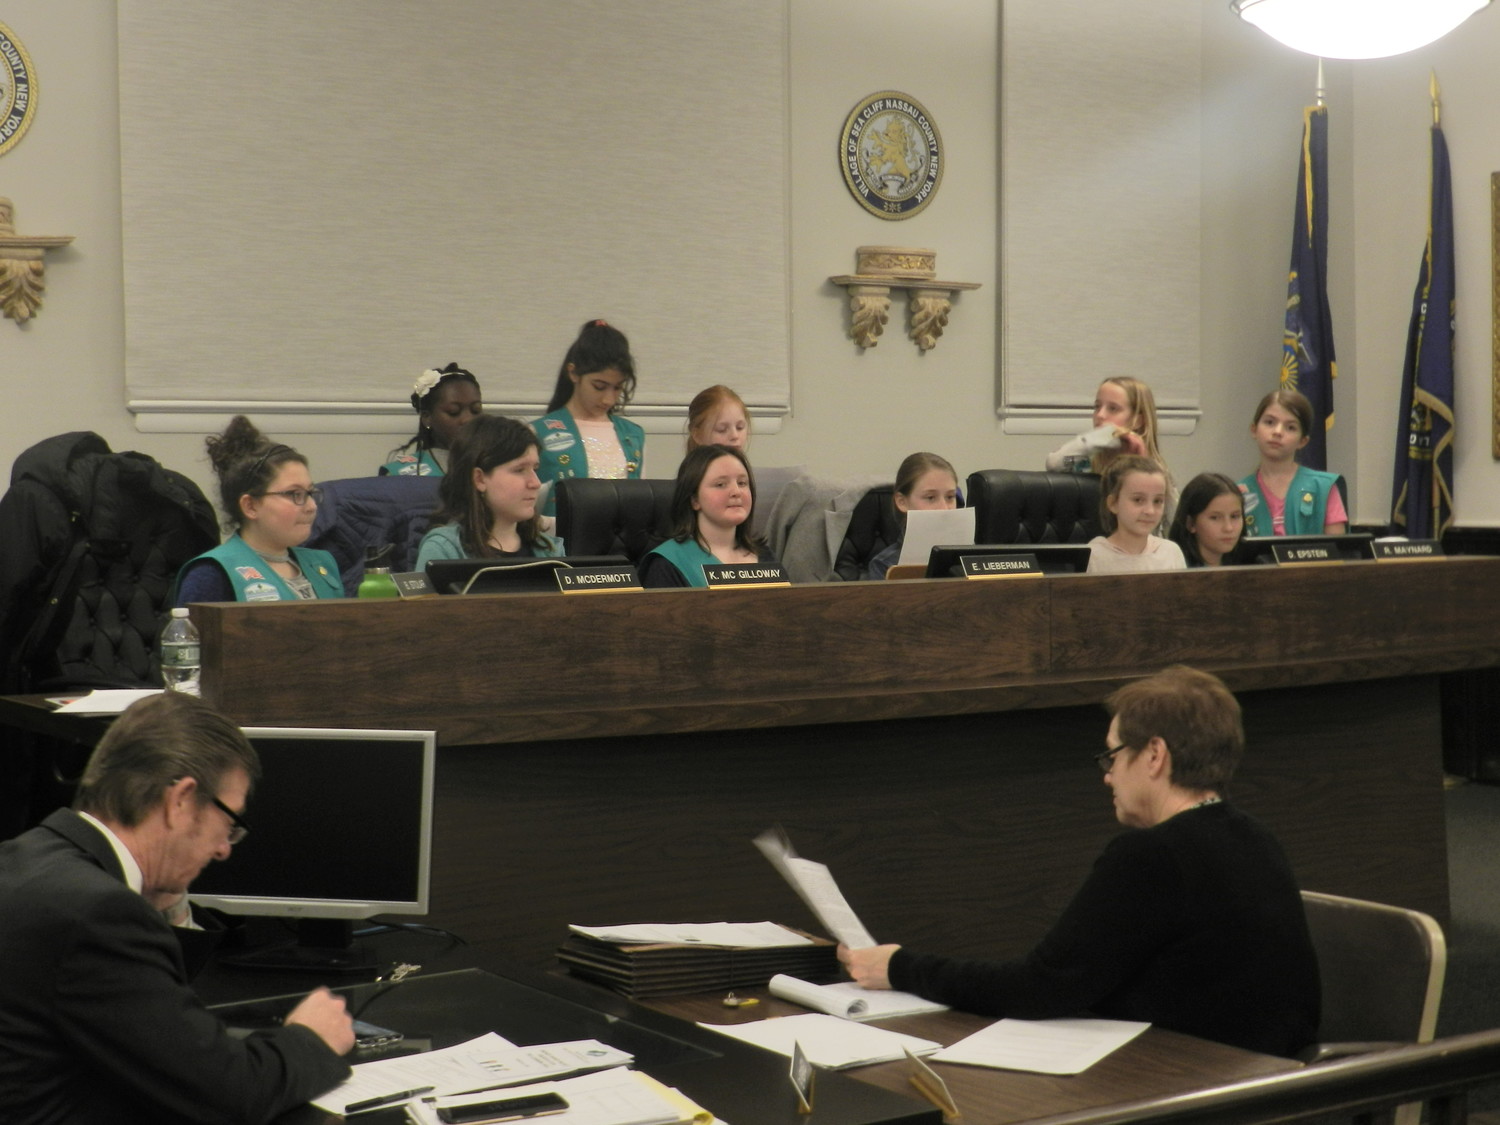 Girl Scout Troops 64 and 36 took over the board to present their proposal to paint a mural at Sea Cliff’s beach pavilion.